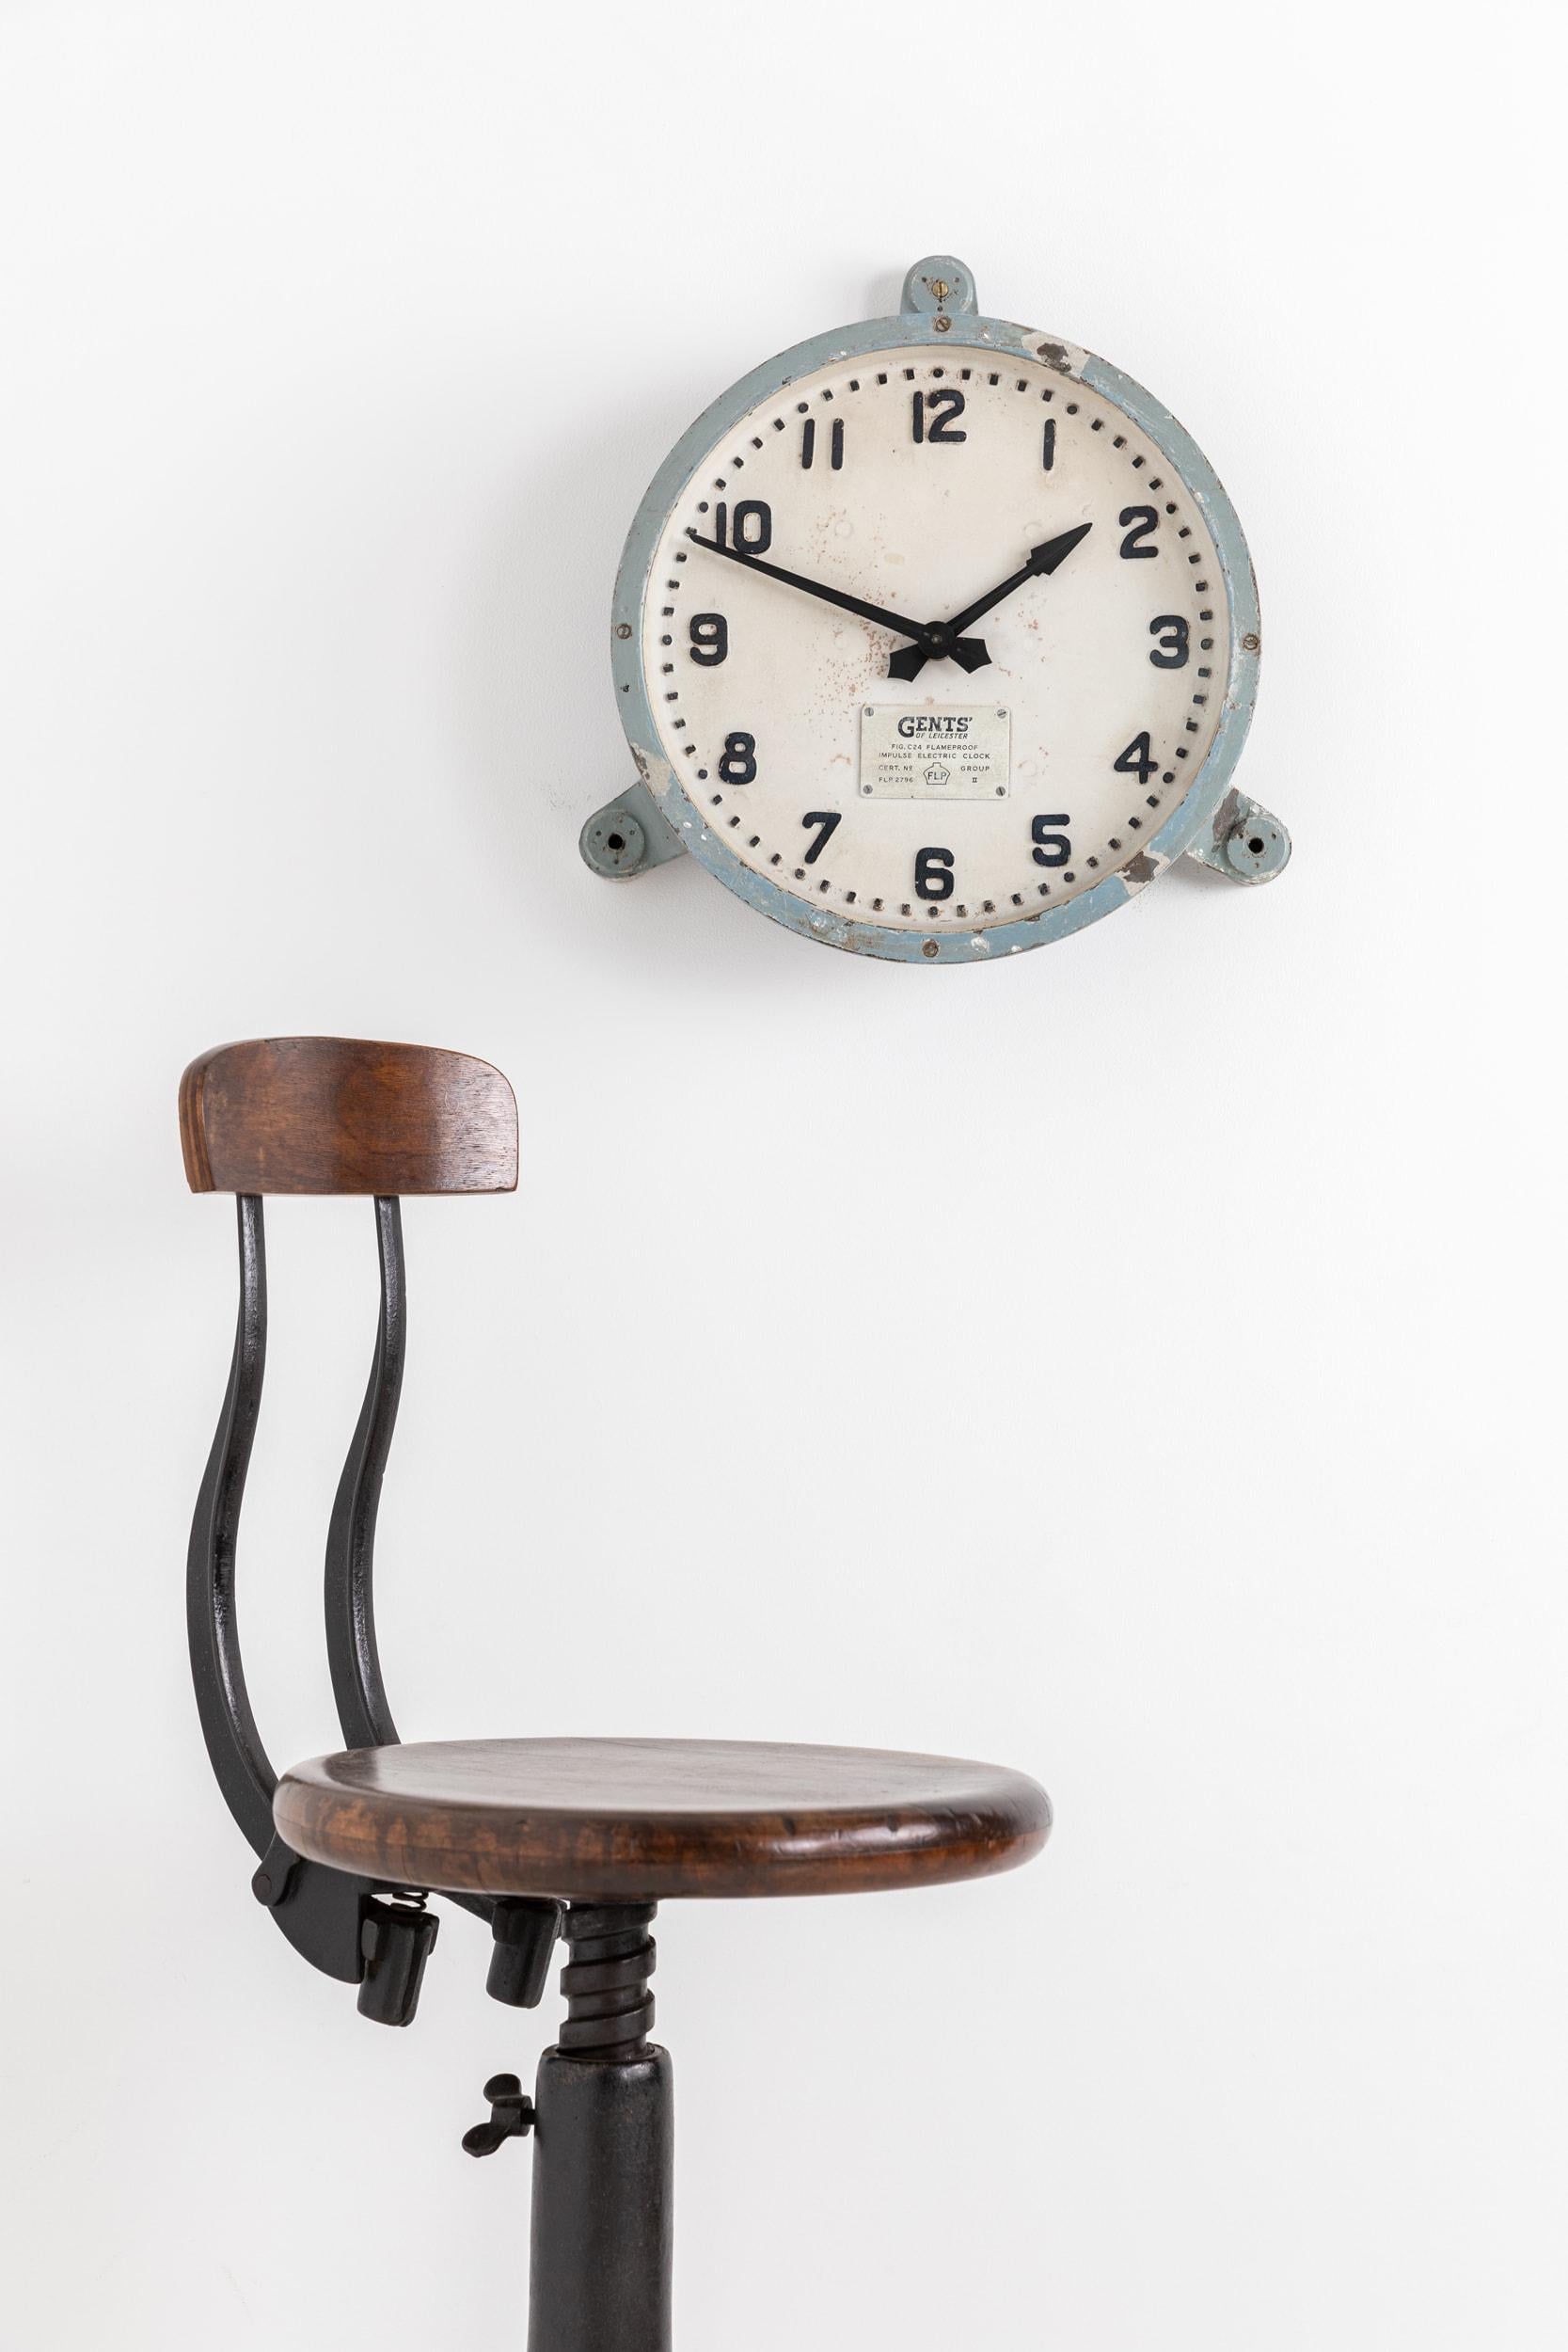 English Vintage Industrial Cast Iron Gents of Leicester Factory Wall Clock, c.1930 For Sale